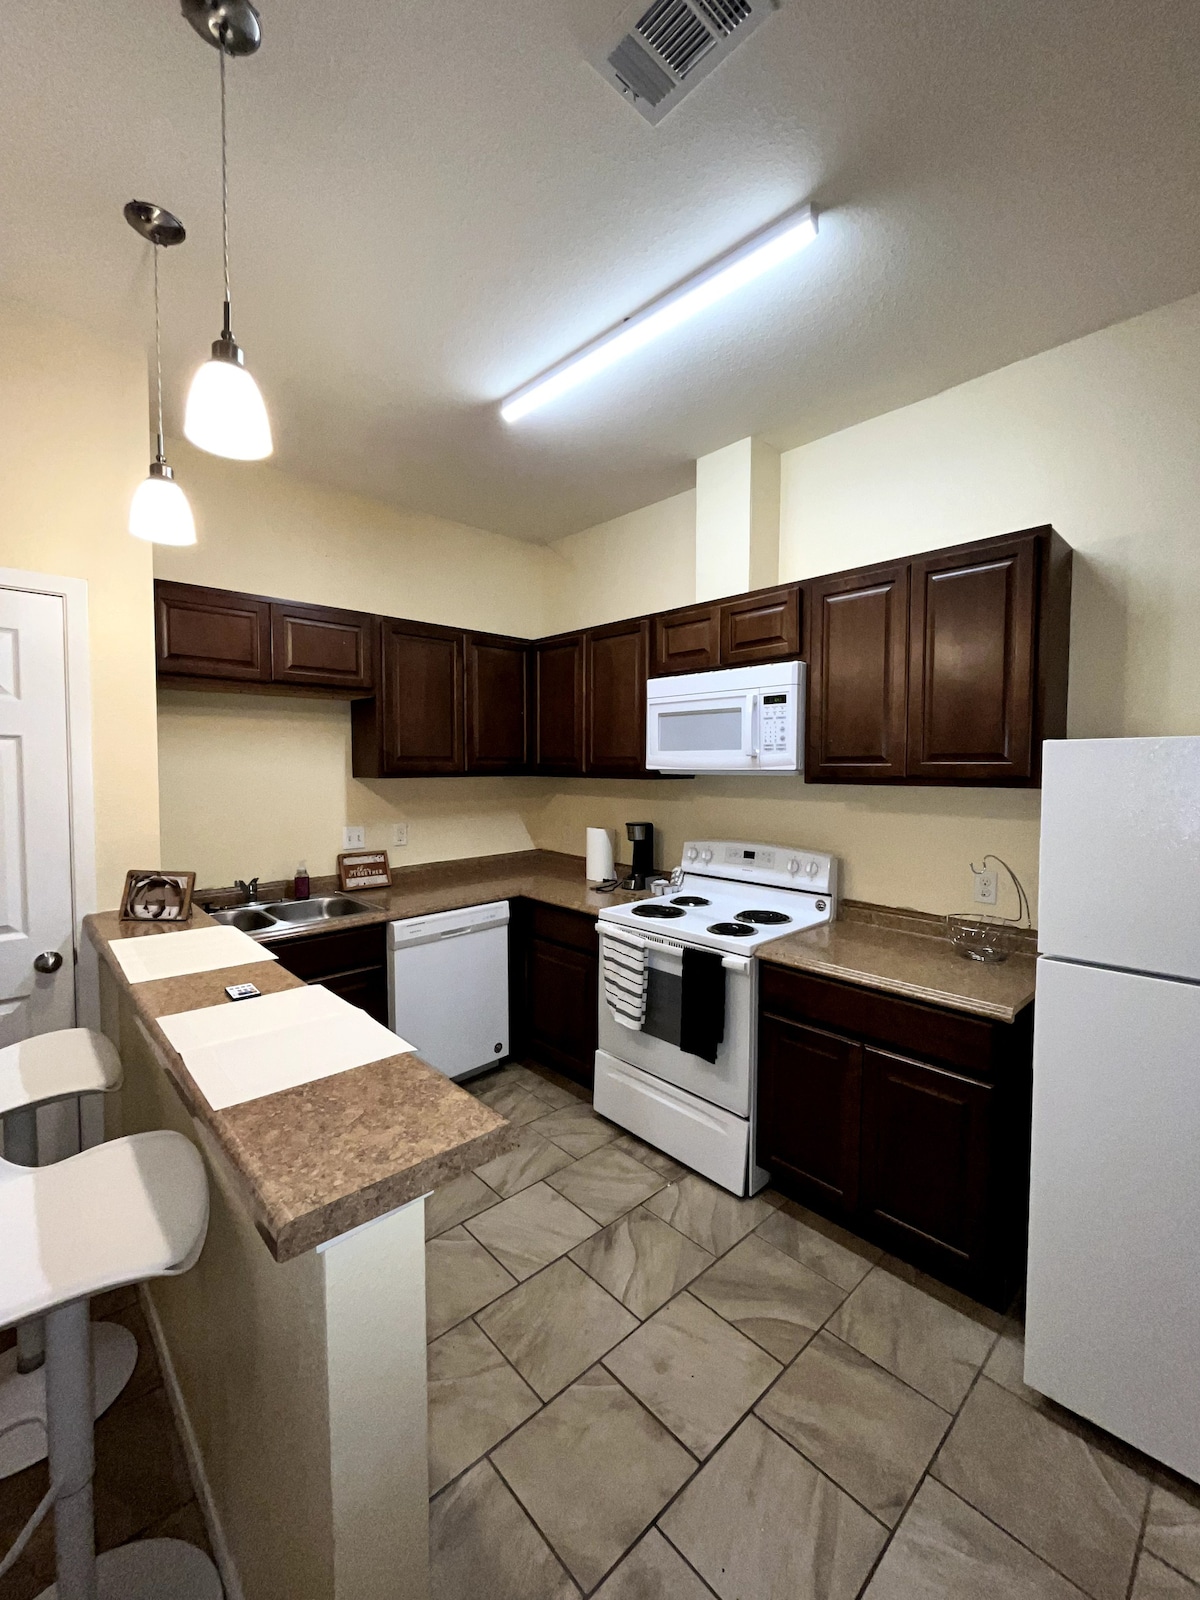 Full service one bedroom apartment downtown Austin